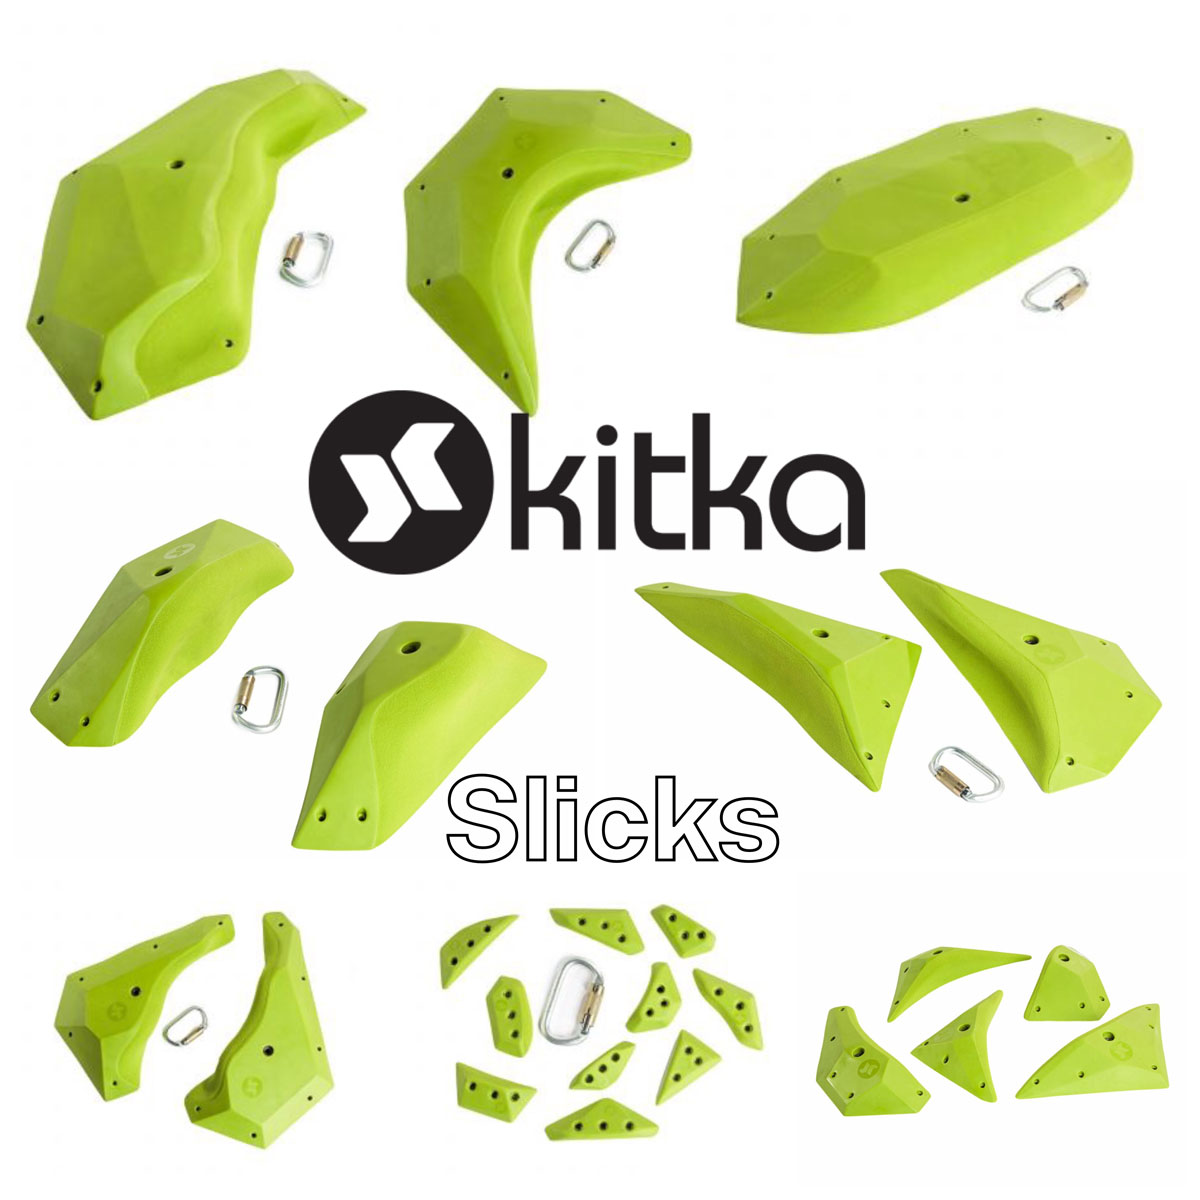 New Kitka grips with a "Scandinavian touch"